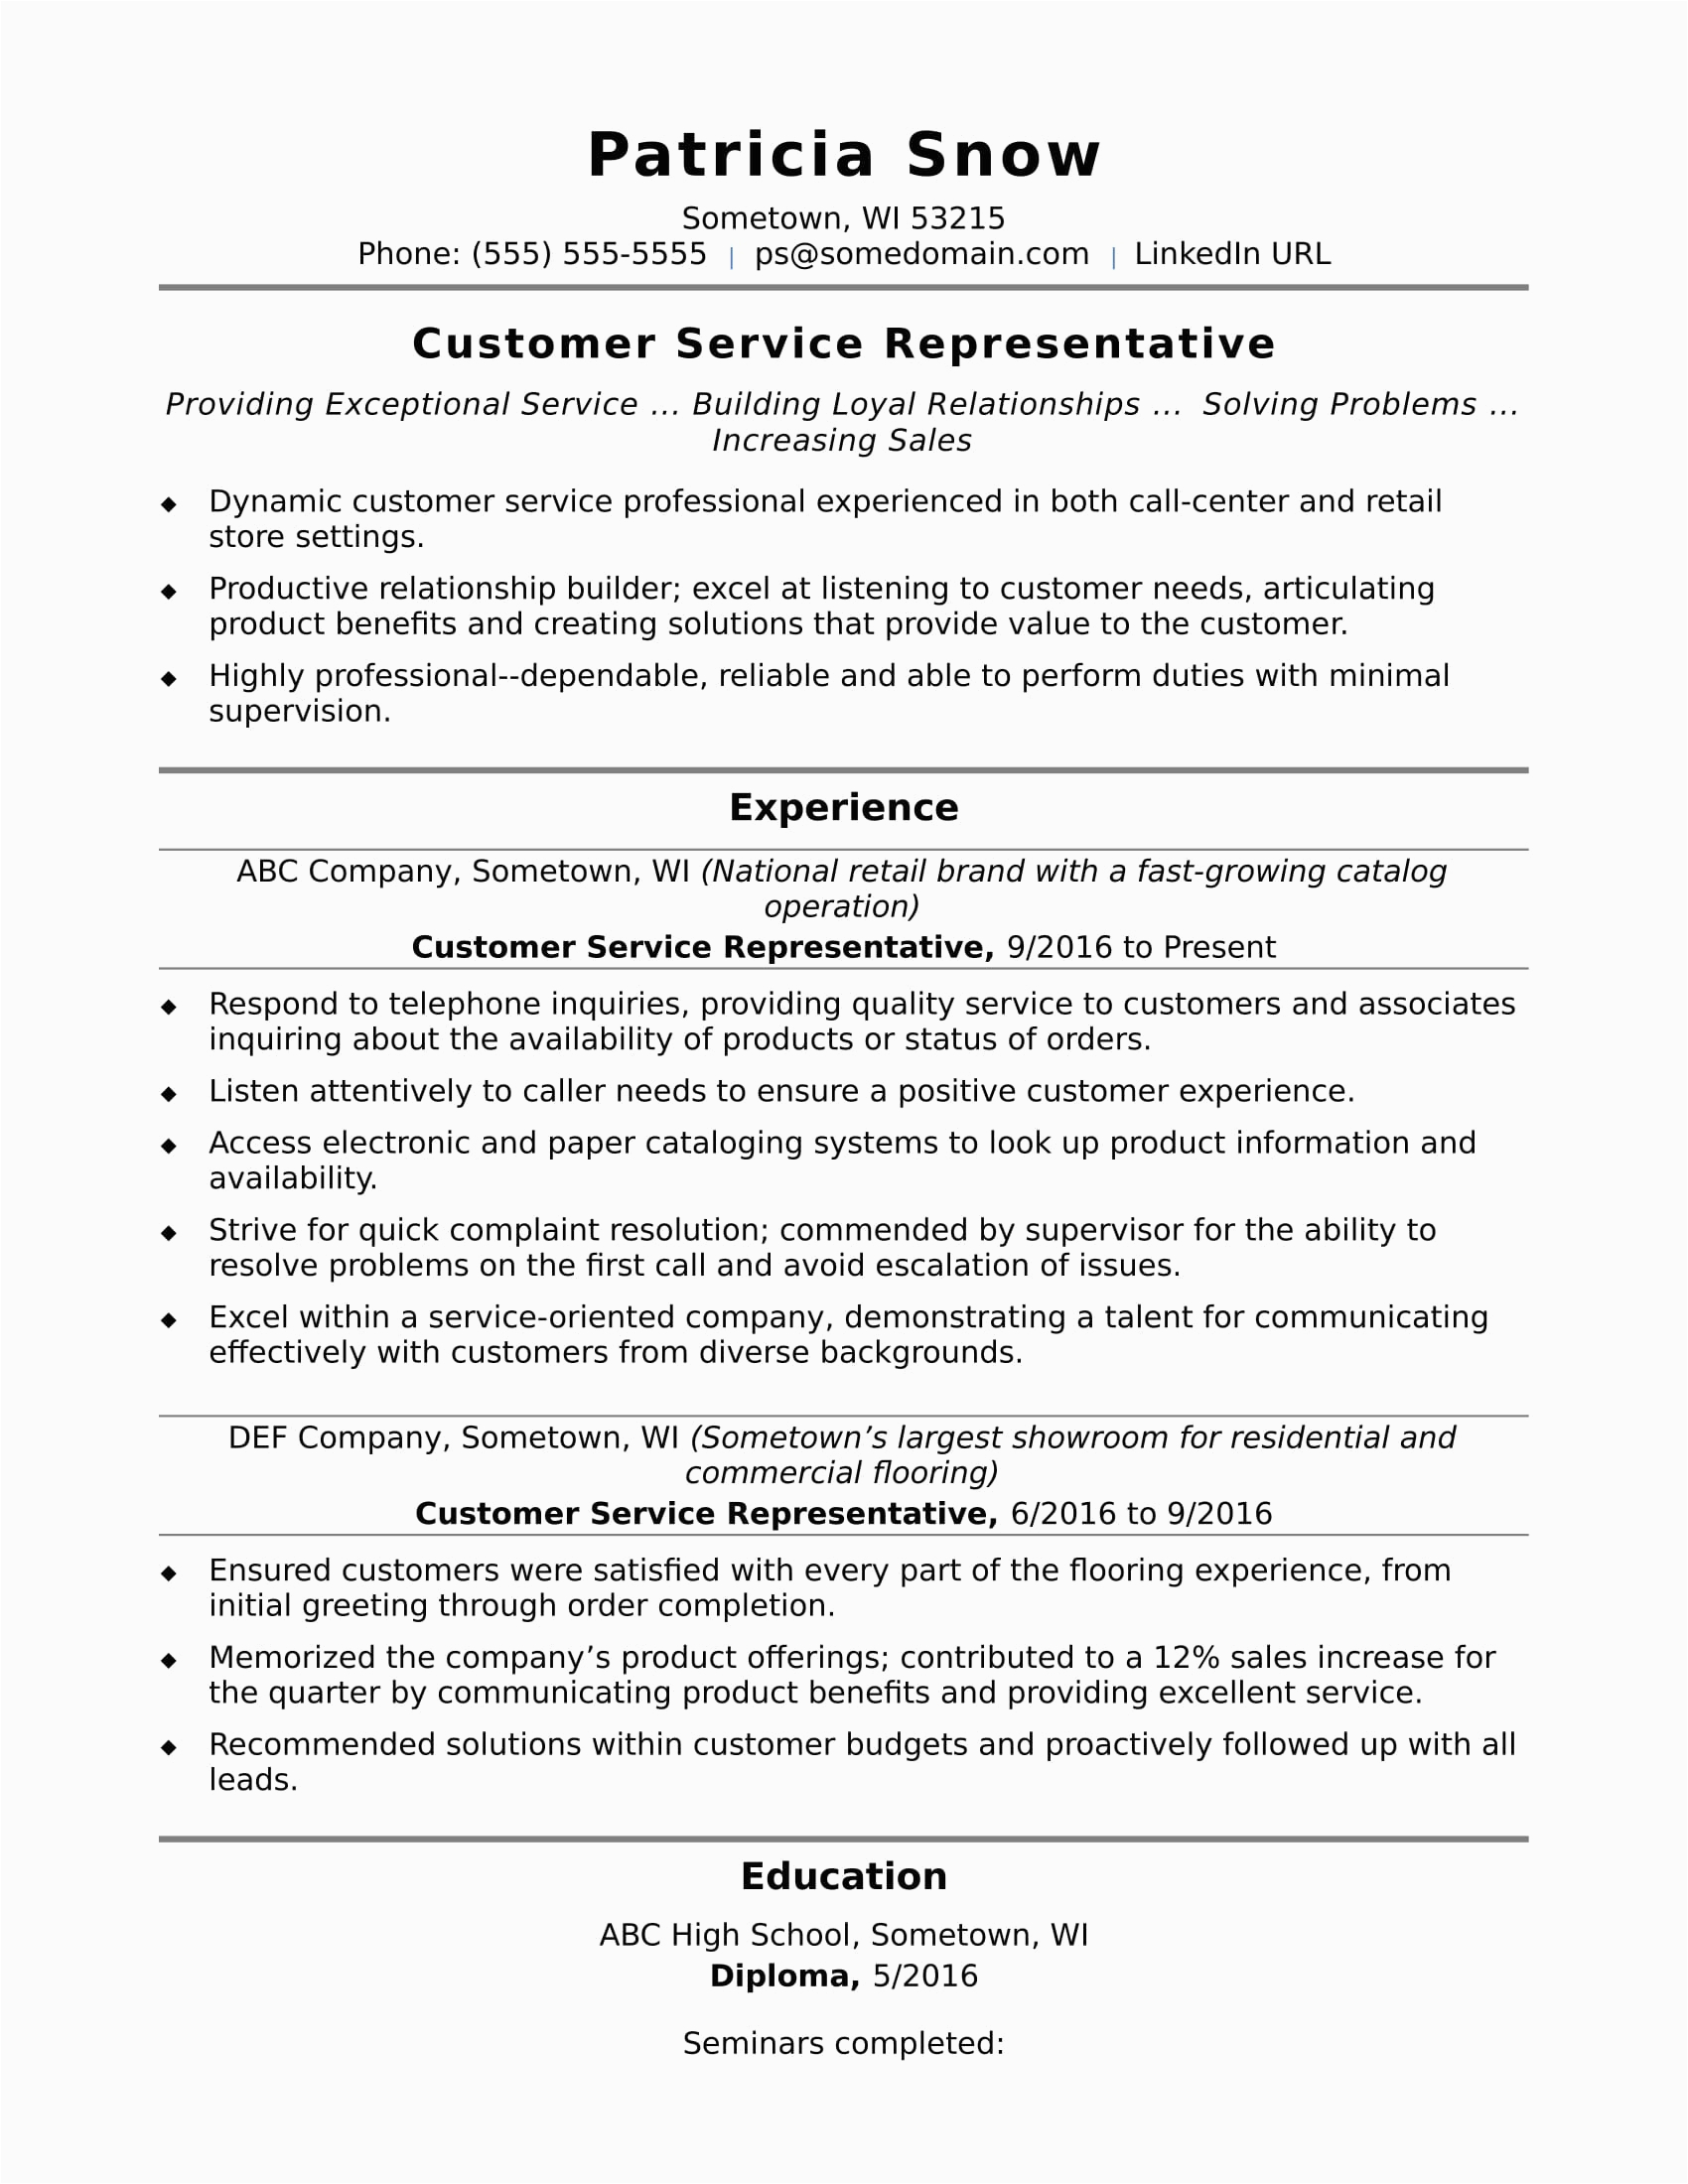 Resume Template for Customer Service Representative Customer Service Representative Resume Sample